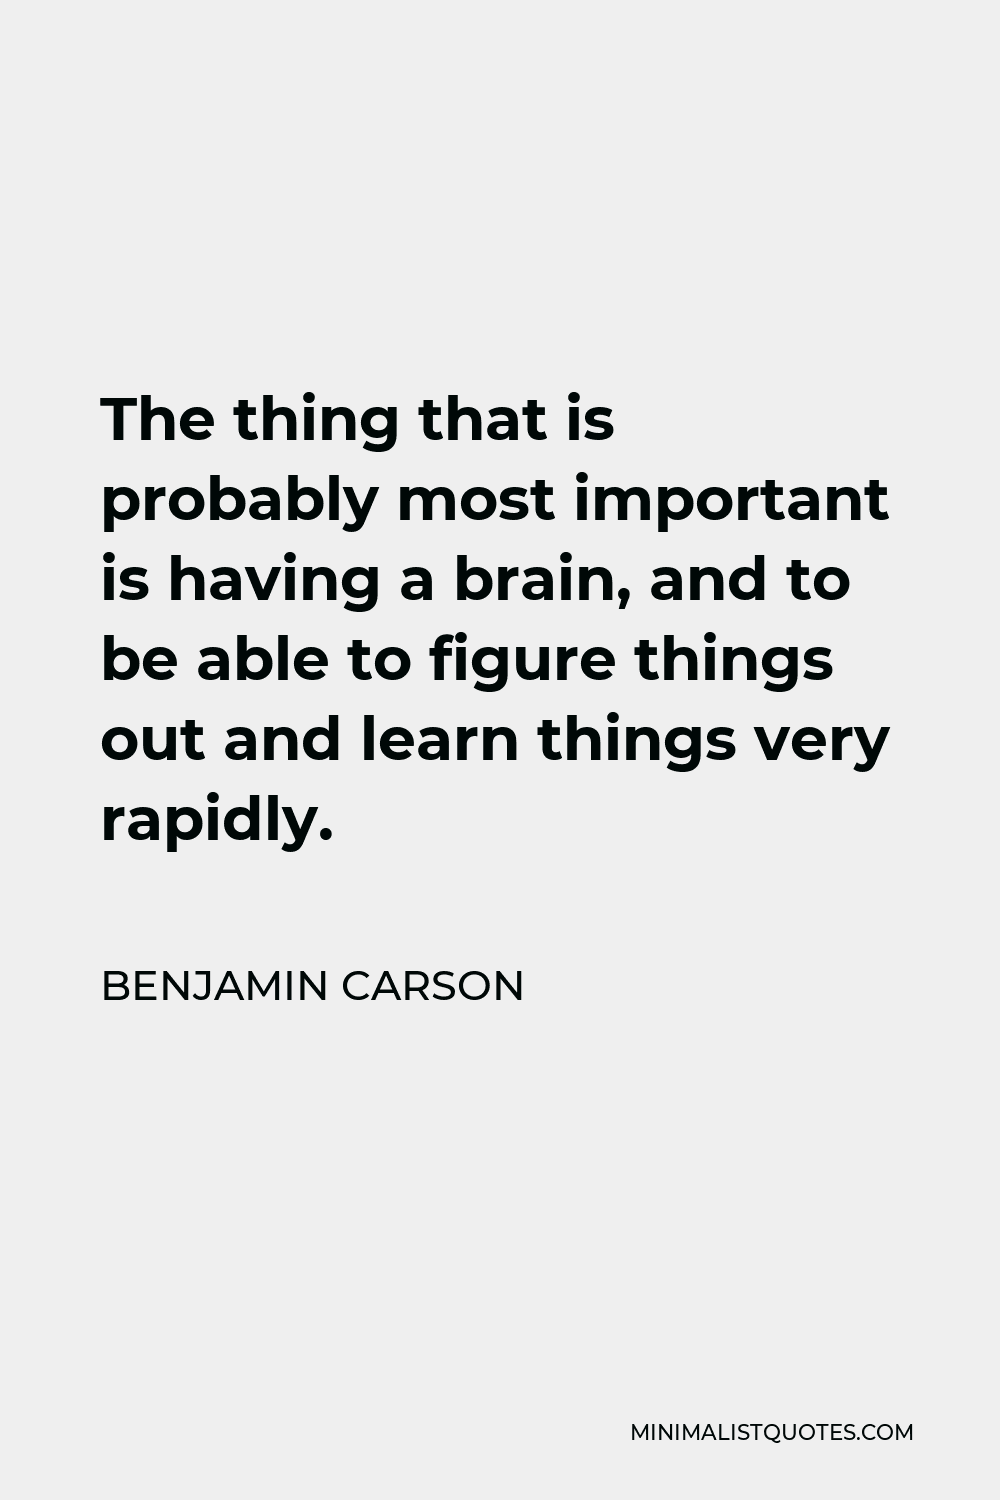 Benjamin Carson Quote - The thing that is probably most important is having a brain, and to be able to figure things out and learn things very rapidly.